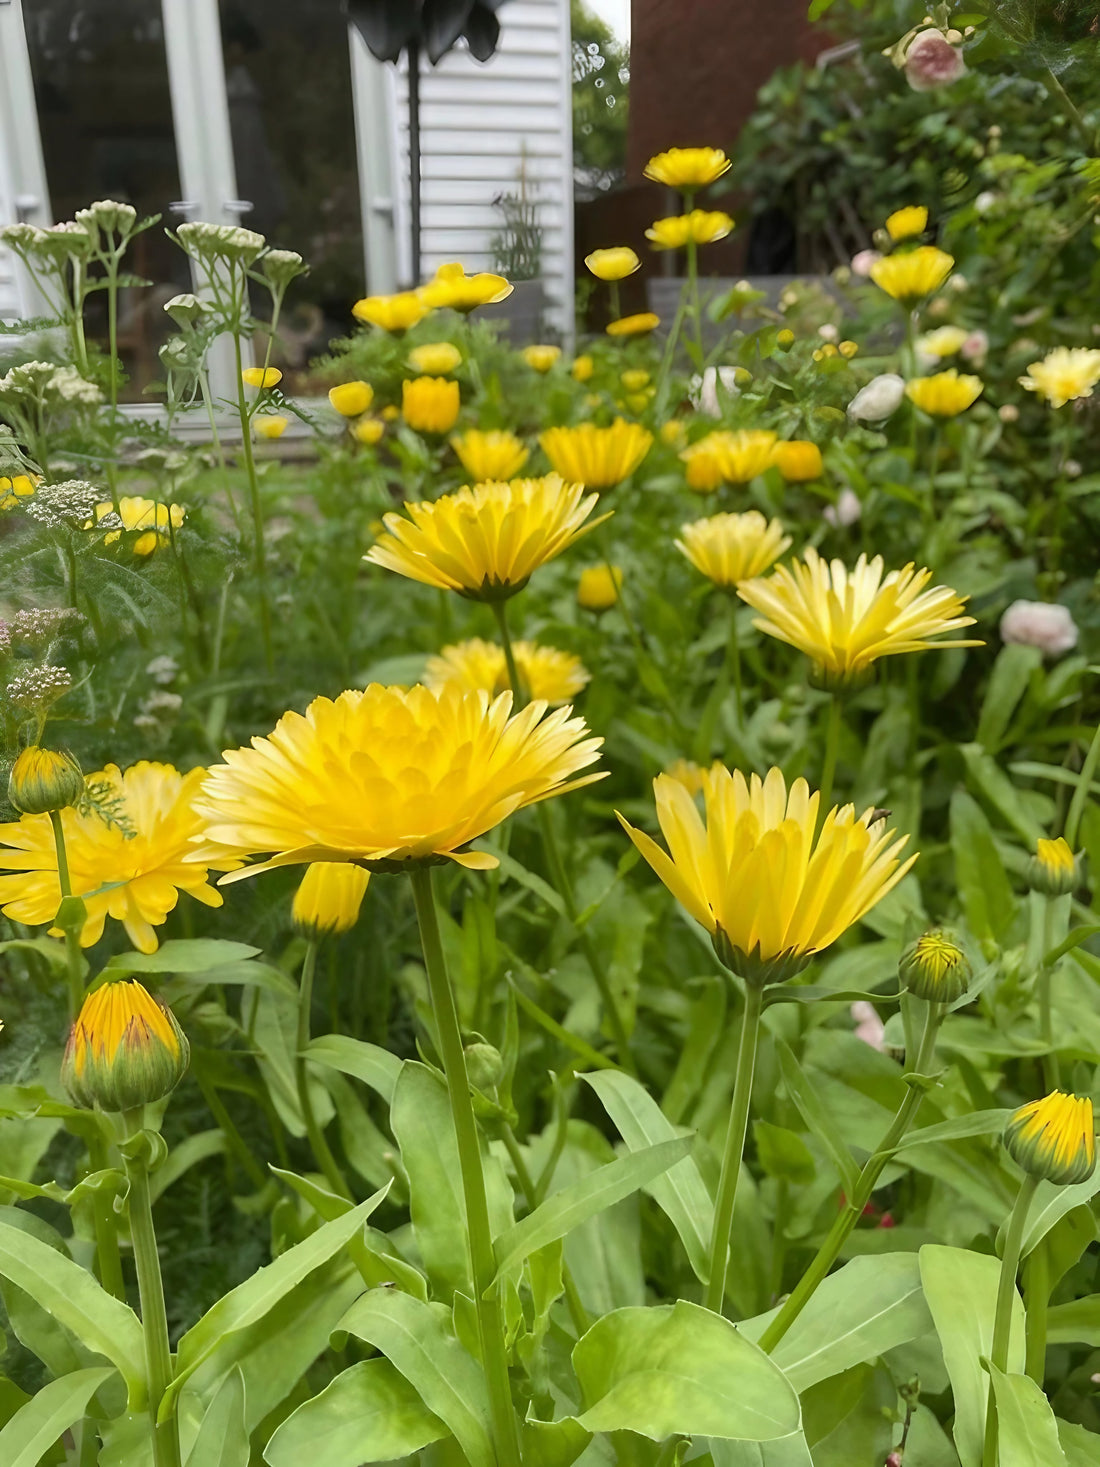 Calendula Pacific Beauty Cream displayed in a natural garden setting